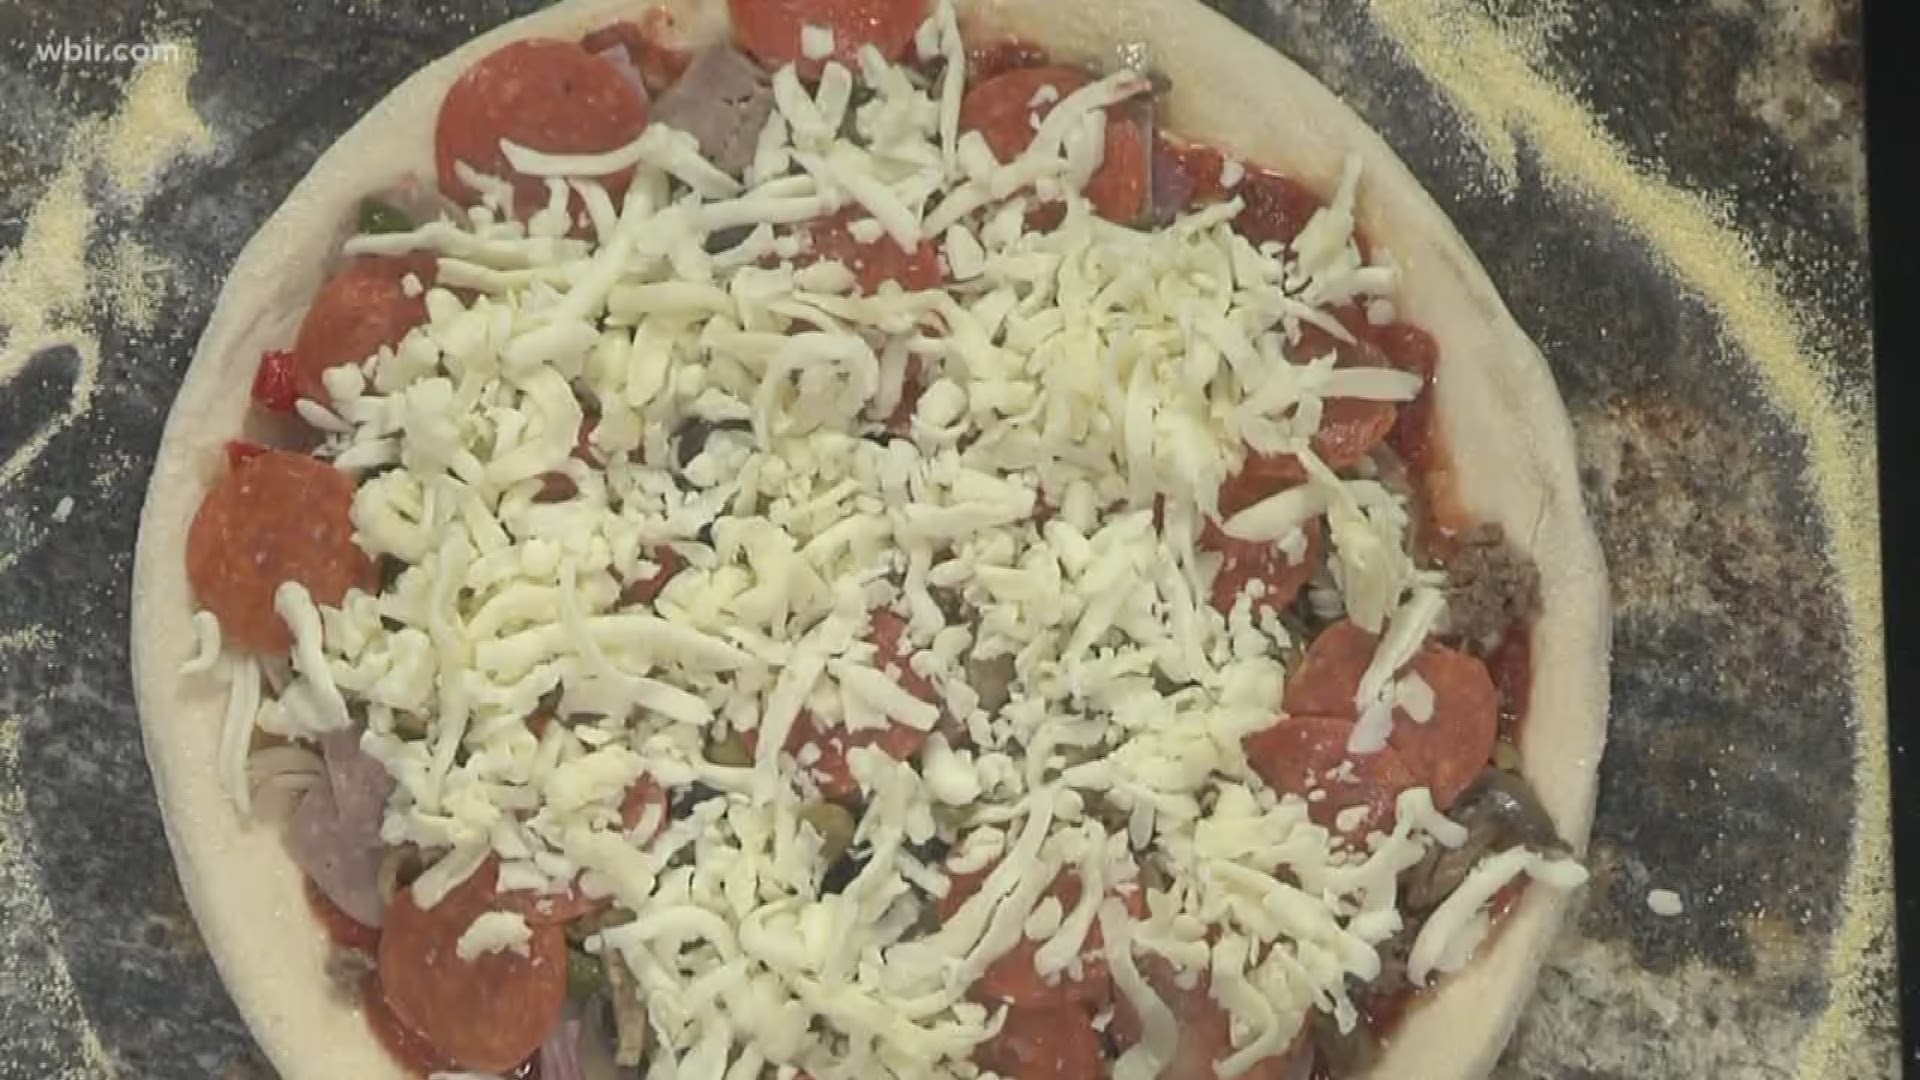 Jay Bernard with Metro Pizza share his 10 topping Combination Kitchen Sink pizza recipe. Metro Pizza is located at 1084 Hunters Crossing in Alcoa, Tennessee. Phone: (865) 982-2200, mmmetropizza.com. Jan 4, 2018-4pm